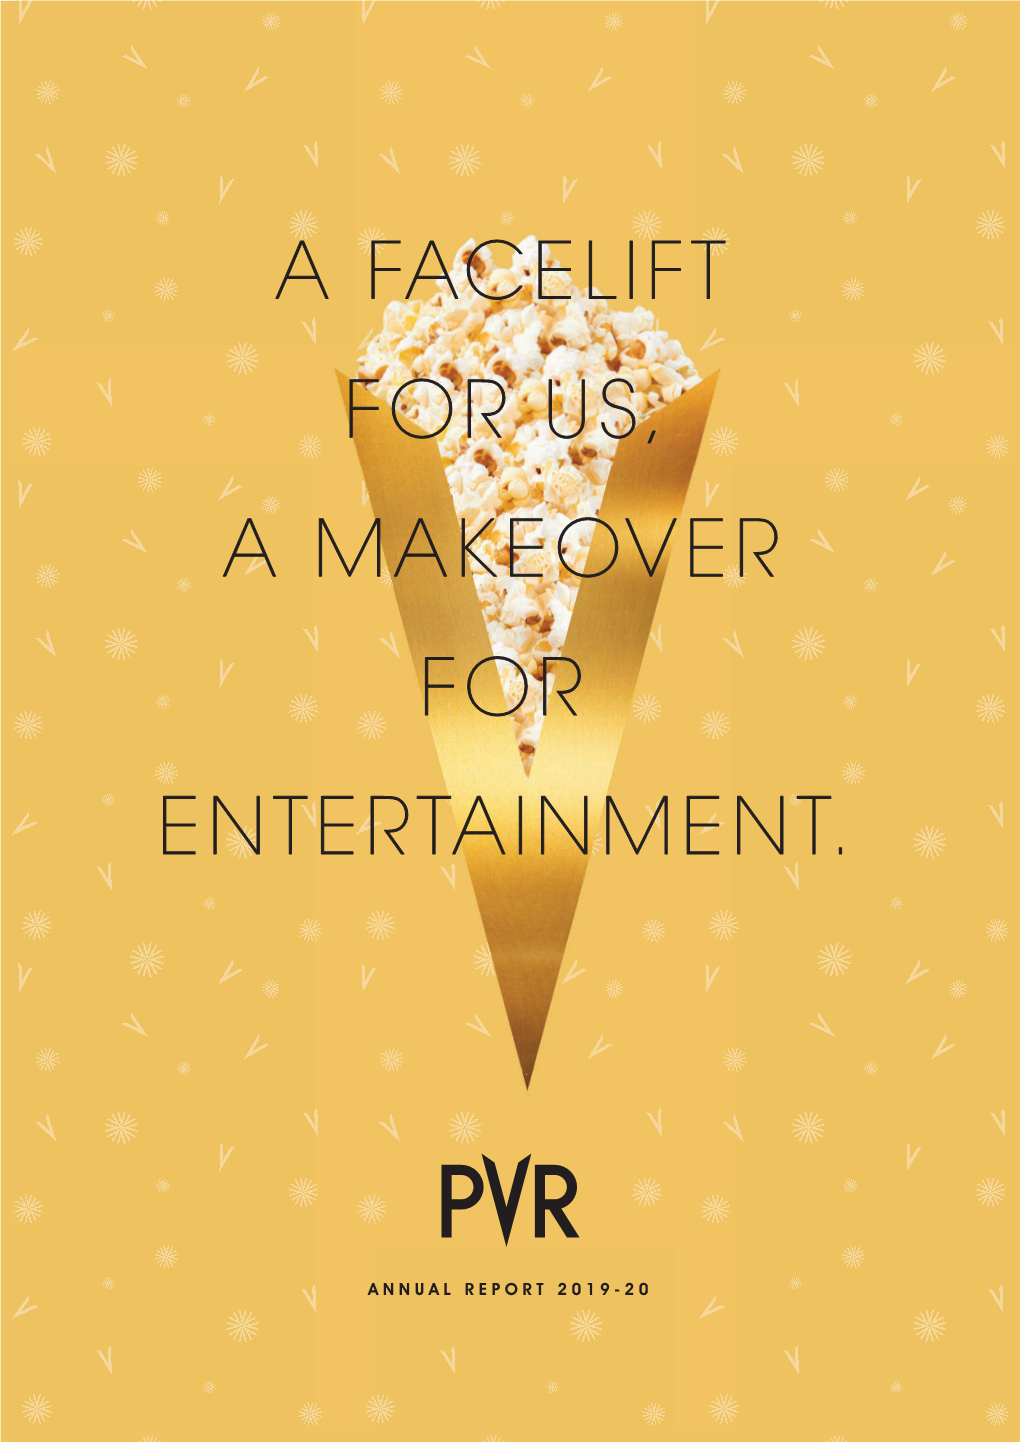 A Facelift for Us, a Makeover for Entertainment